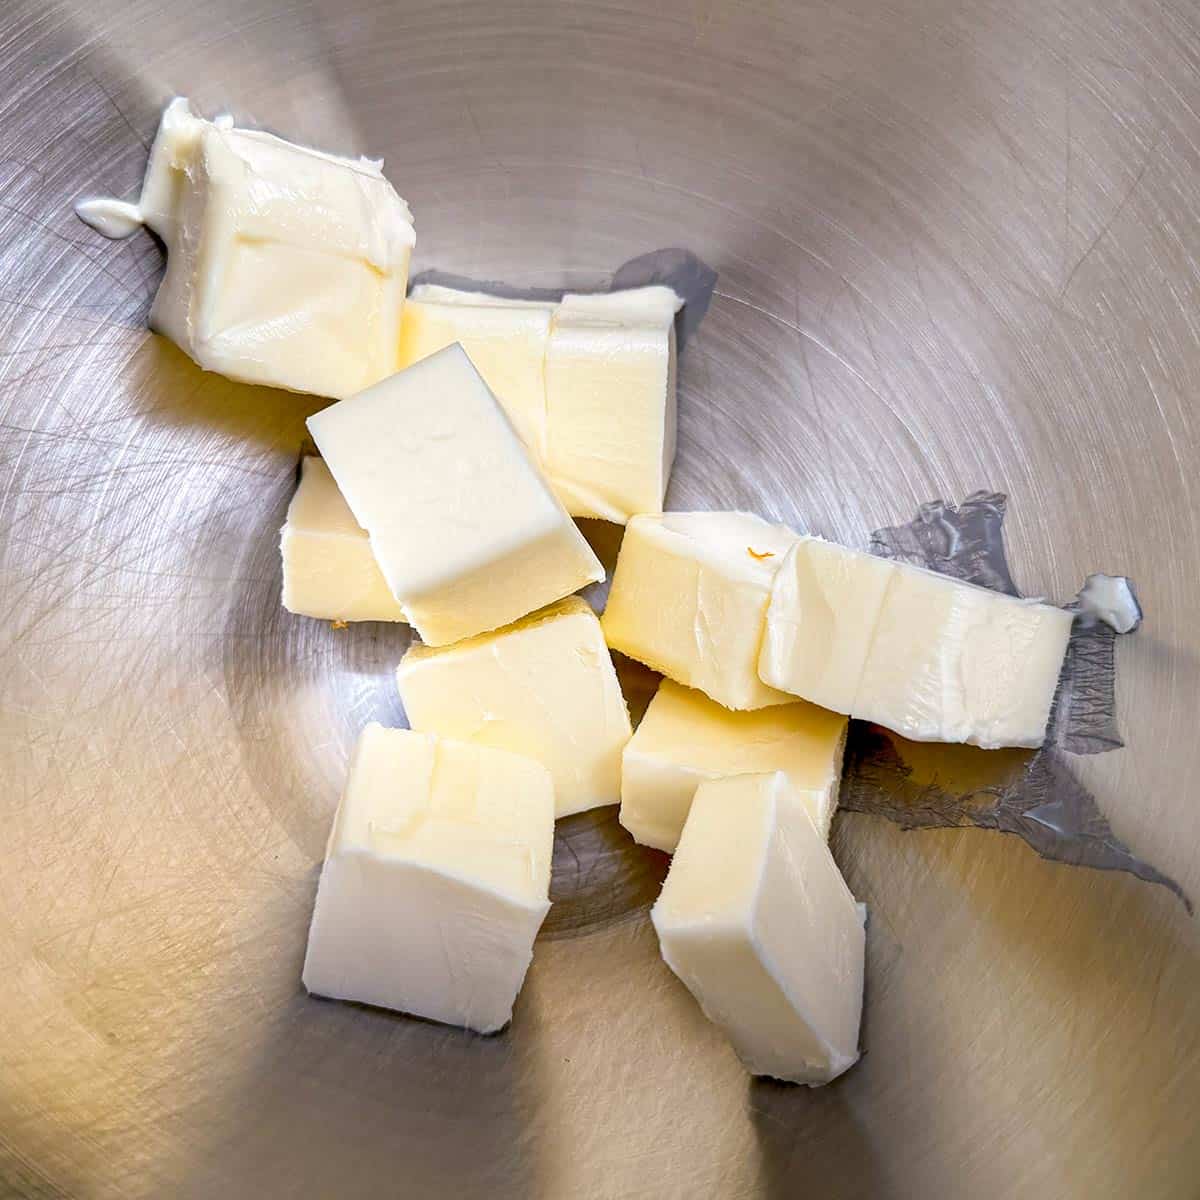 Cubed butter in a mixer bowl.